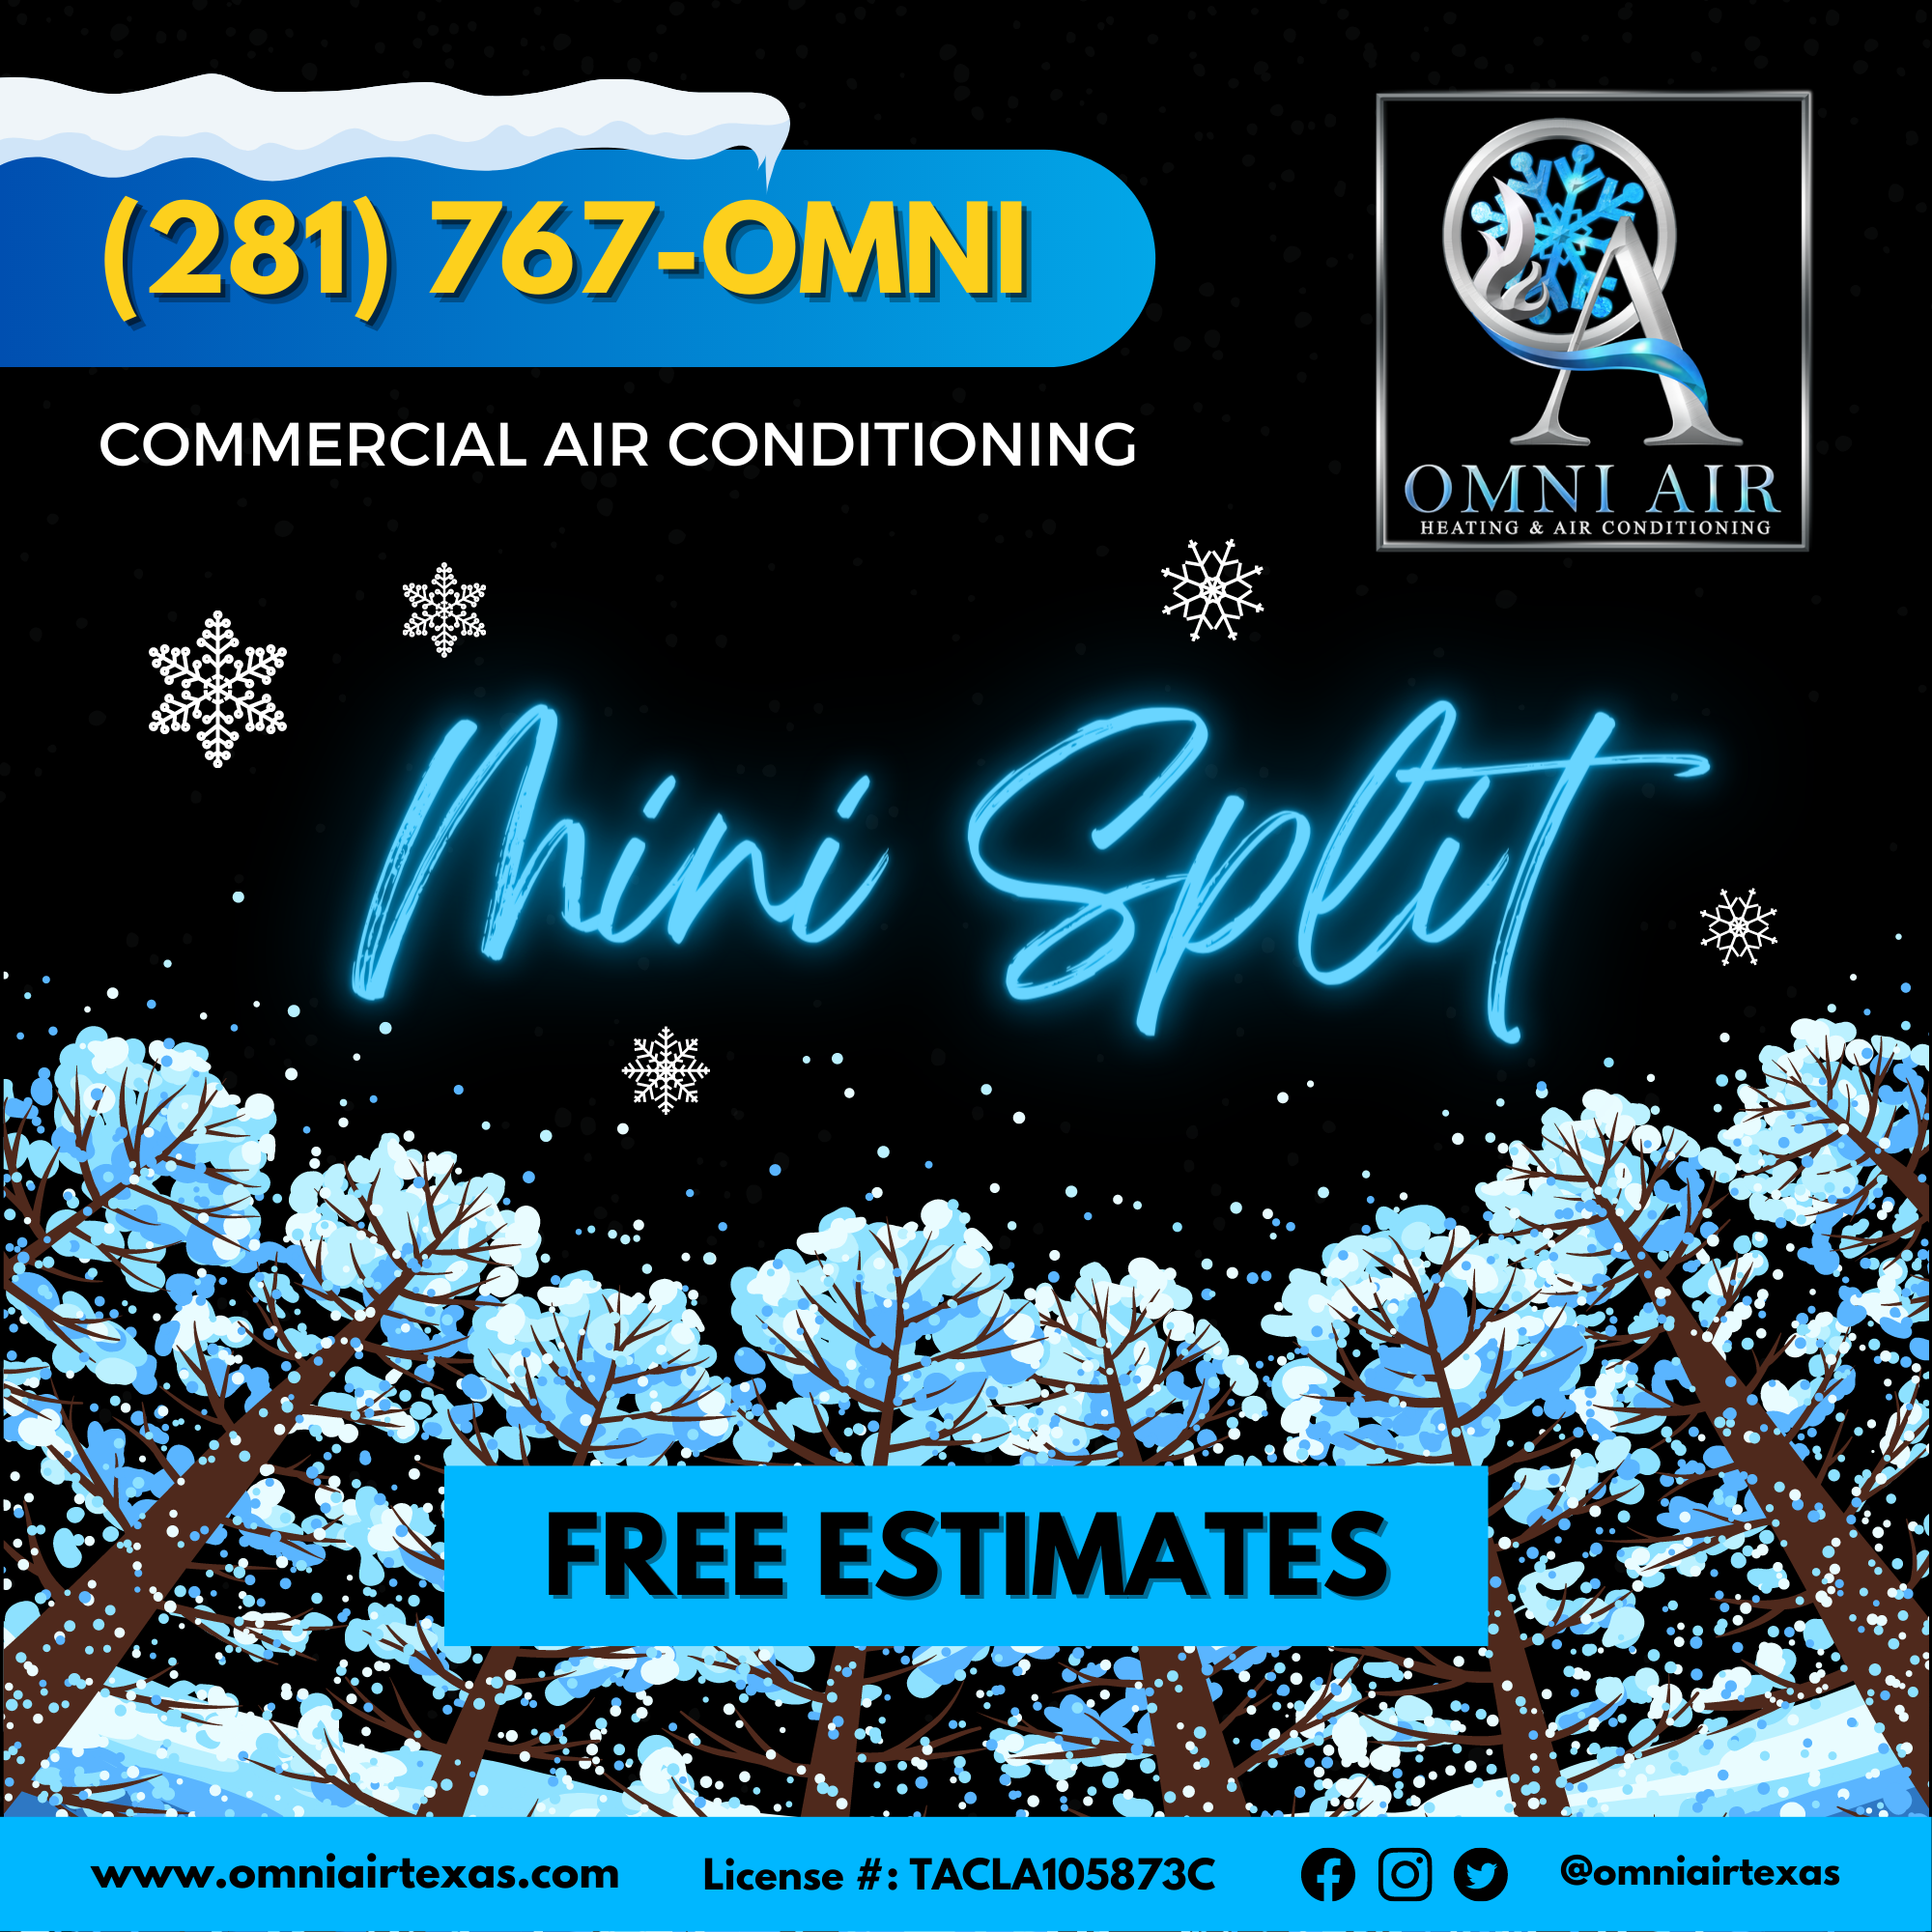 Mini Split - Conroe Commercial Air Conditioning